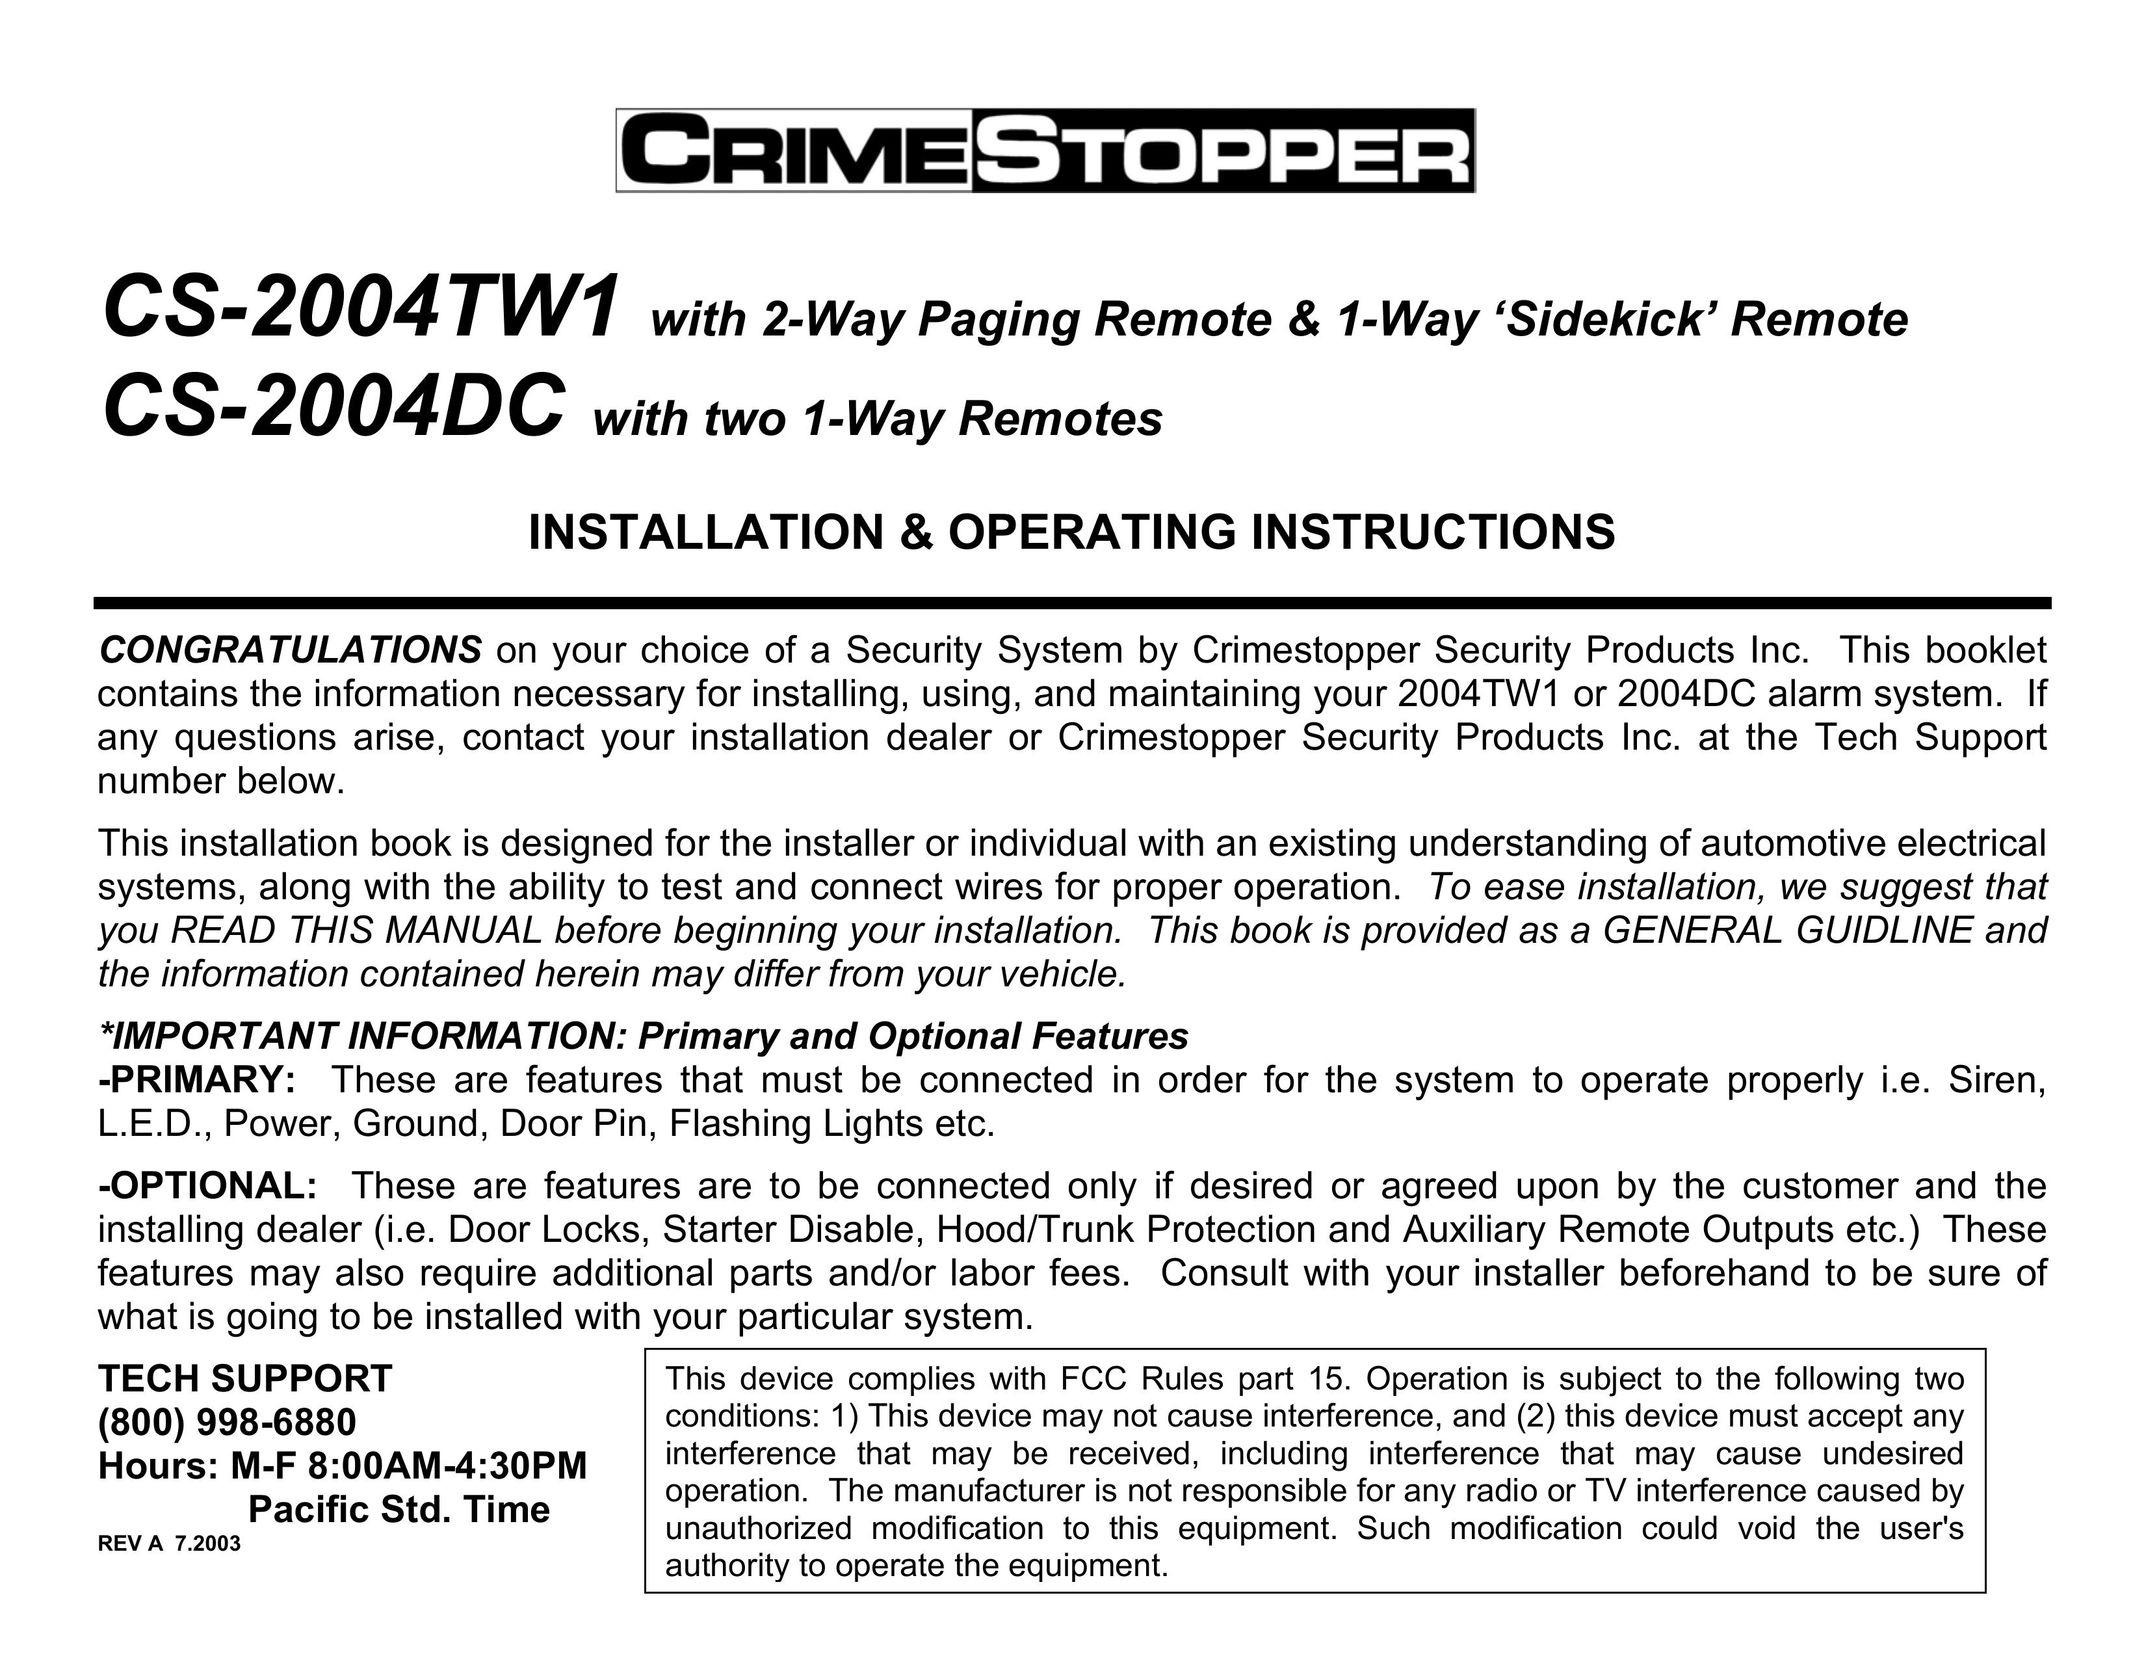 Crimestopper Security Products CS-2004DC Home Security System User Manual